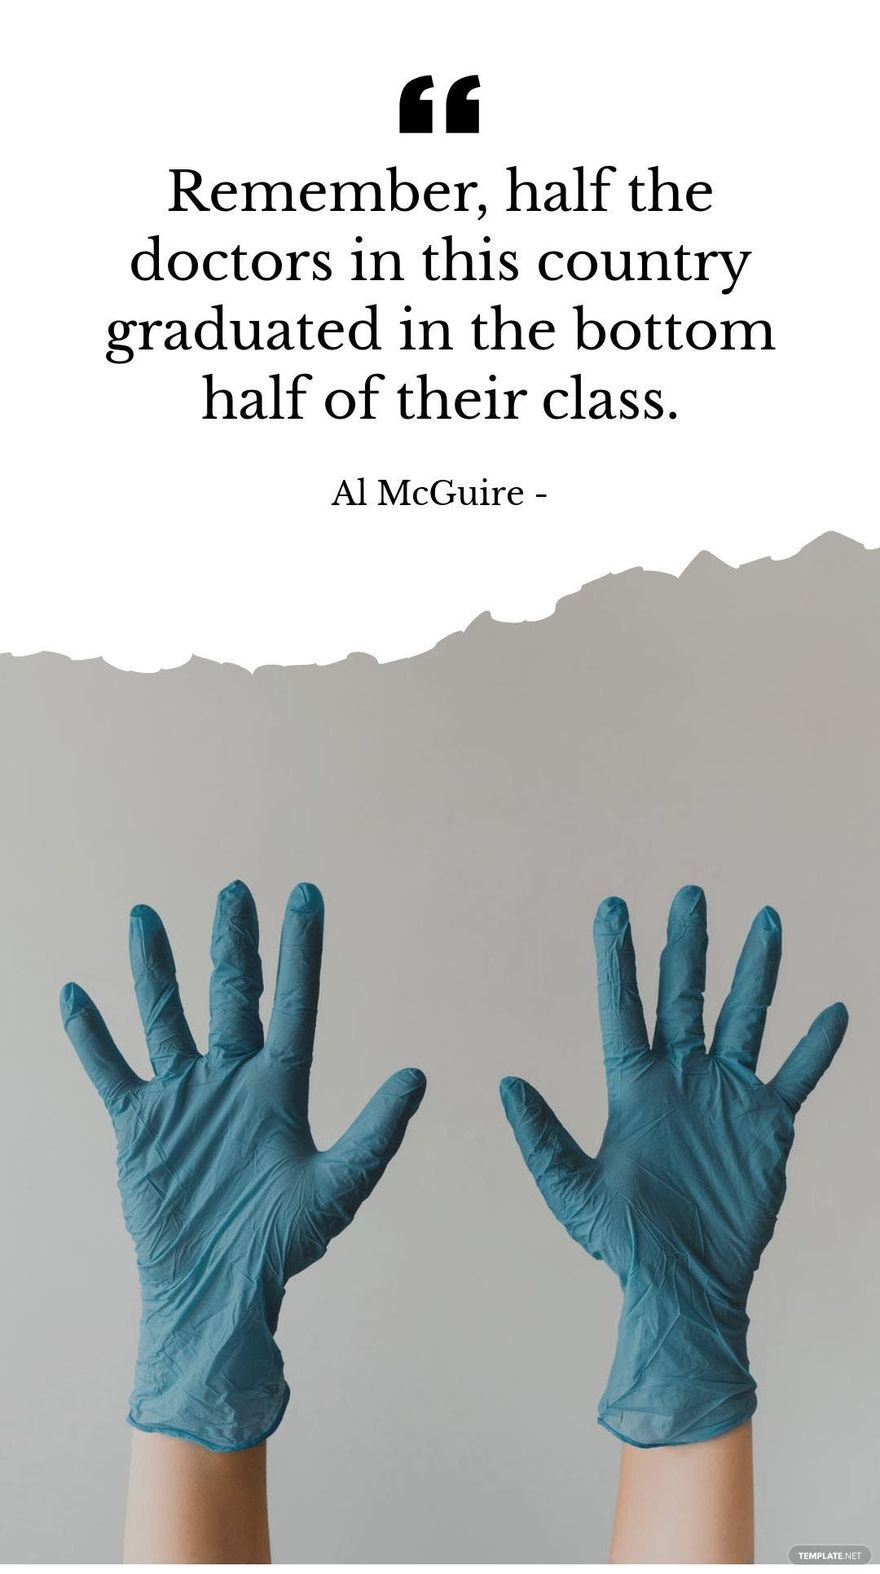 Free Al McGuire - Remember, half the doctors in this country graduated in the bottom half of their class.